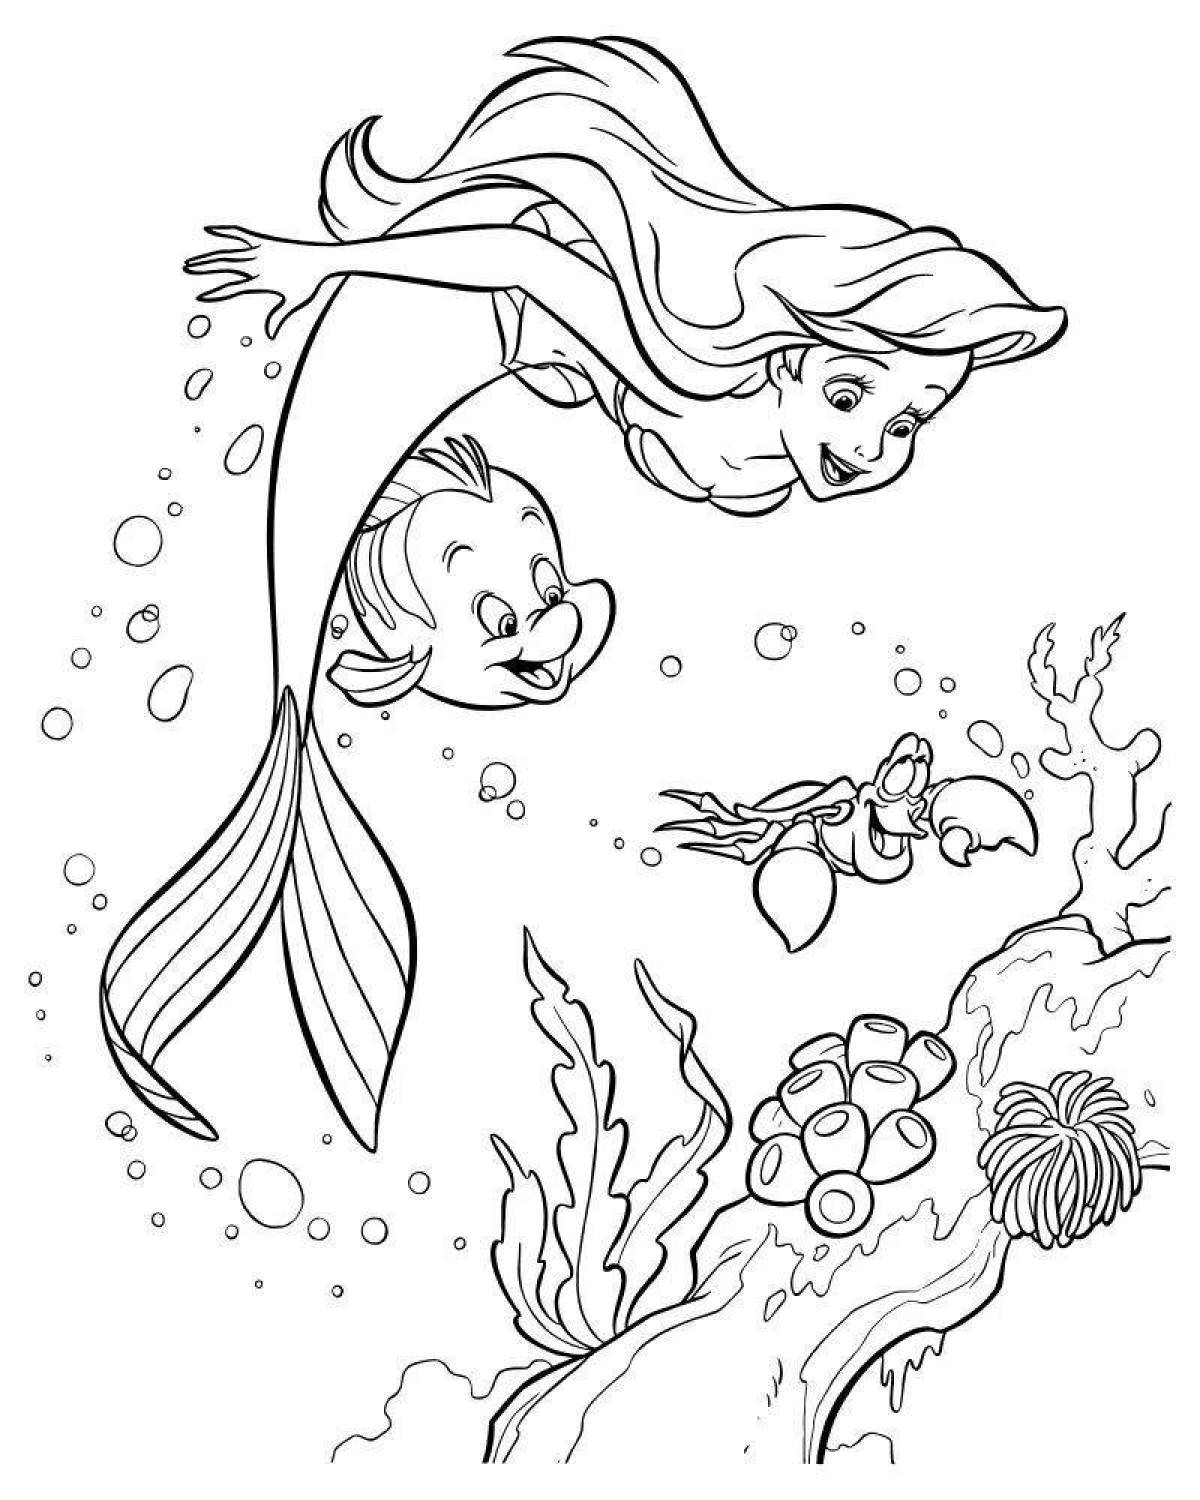 Exquisite little mermaid coloring book for girls